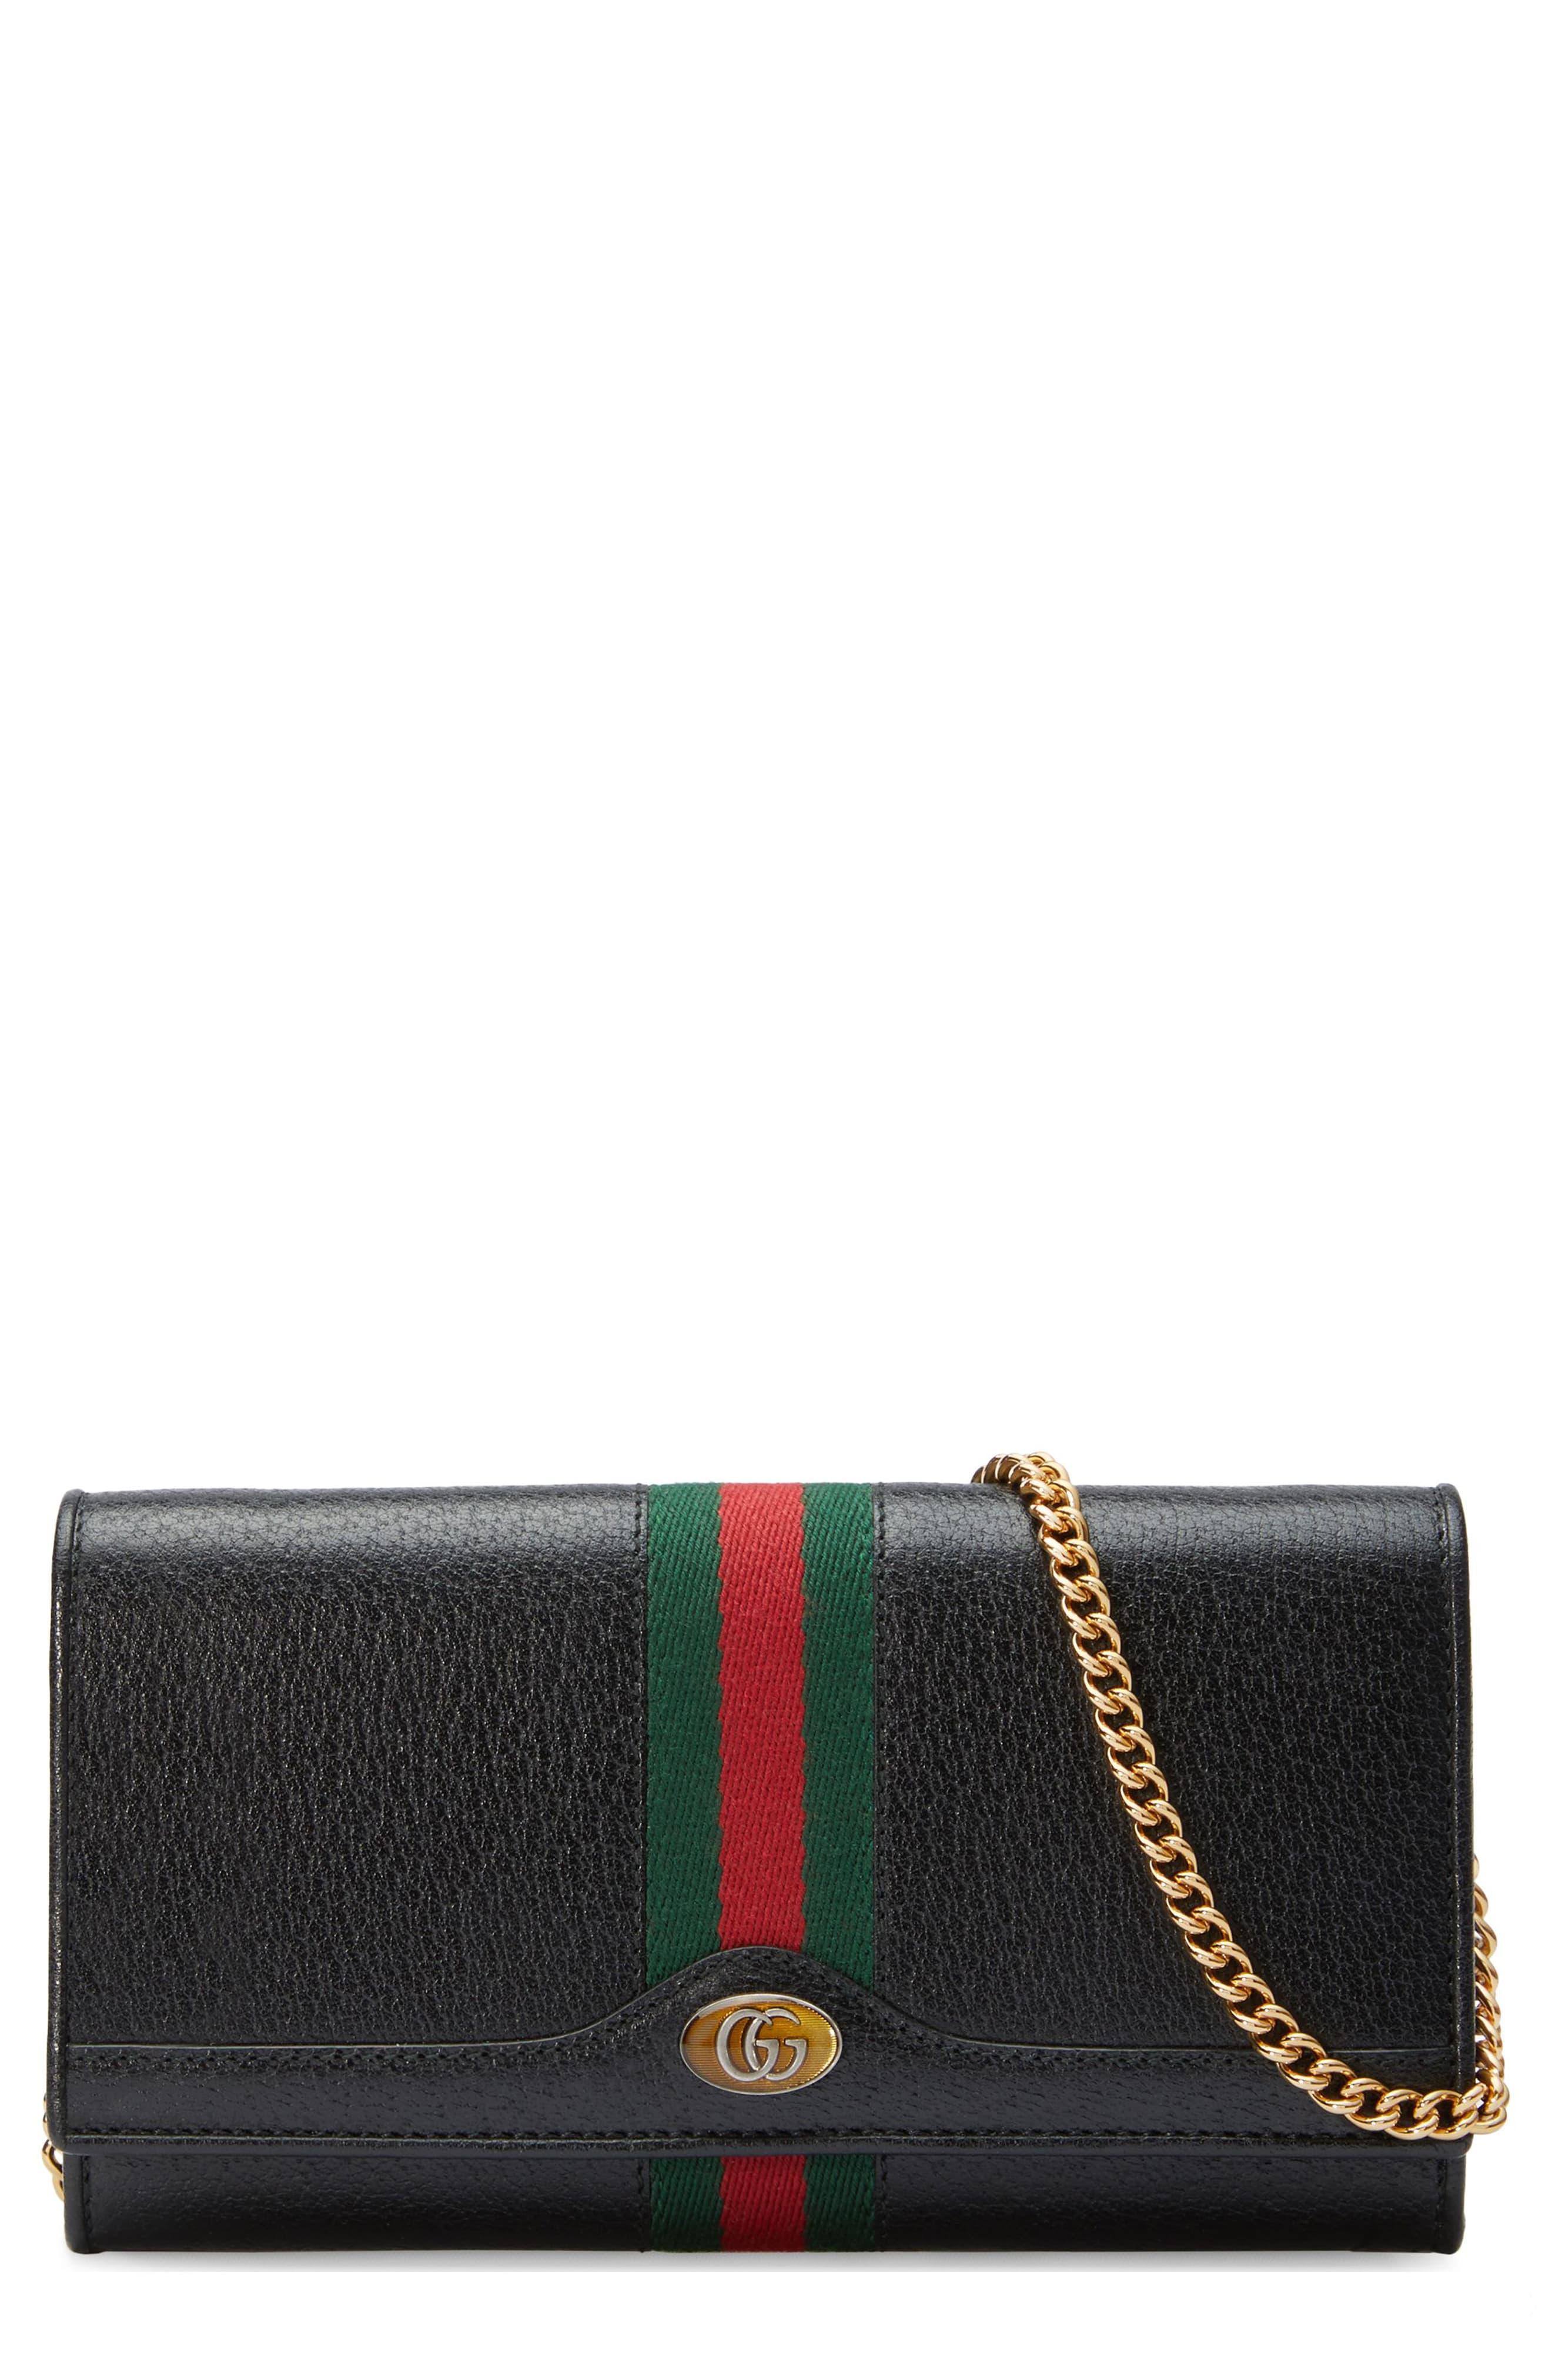 Gucci Ophidia Leather Continental Wallet On A Chain in Black - Lyst